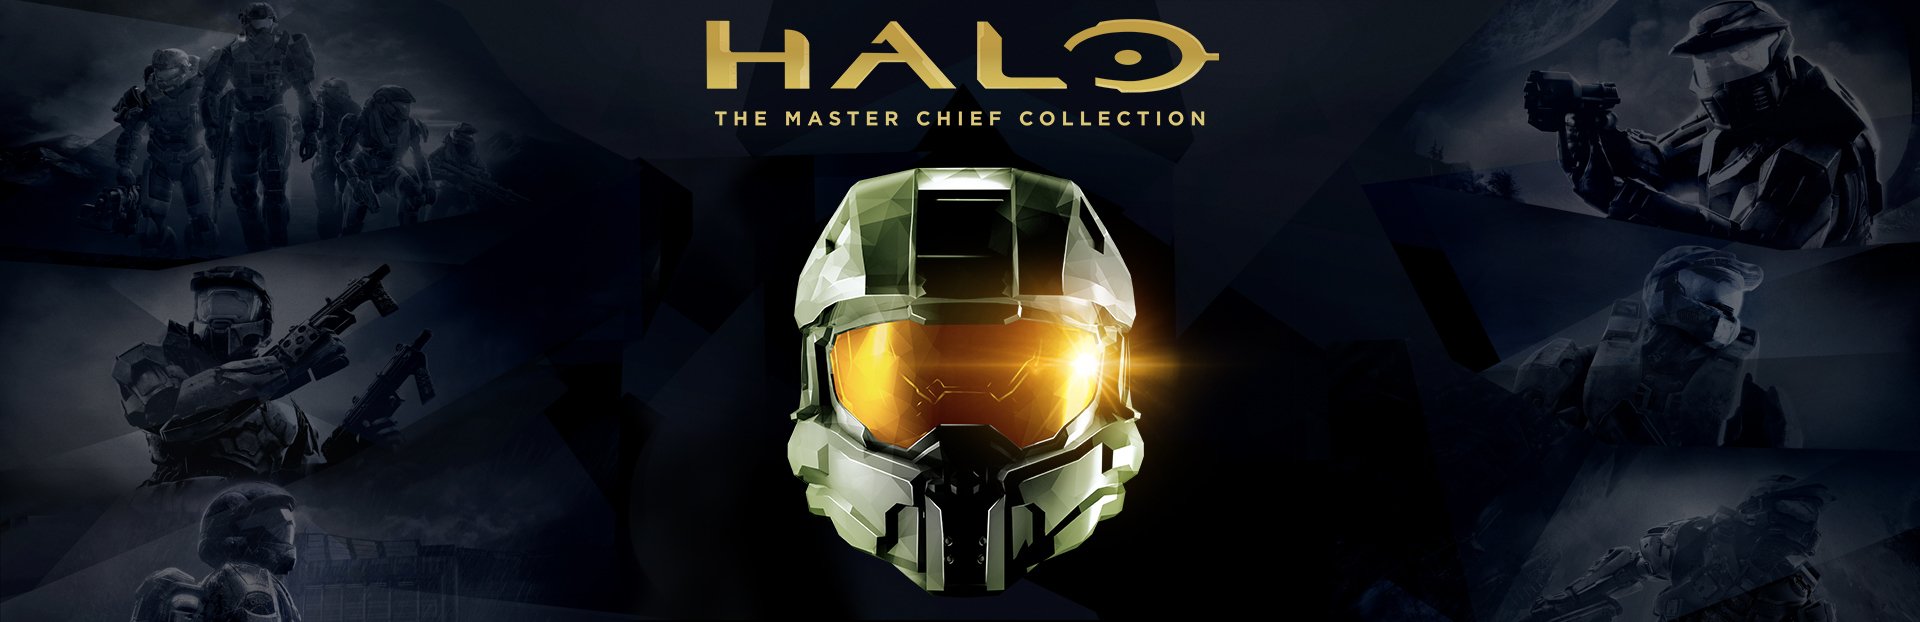 Halo master chief collection steam фото 95